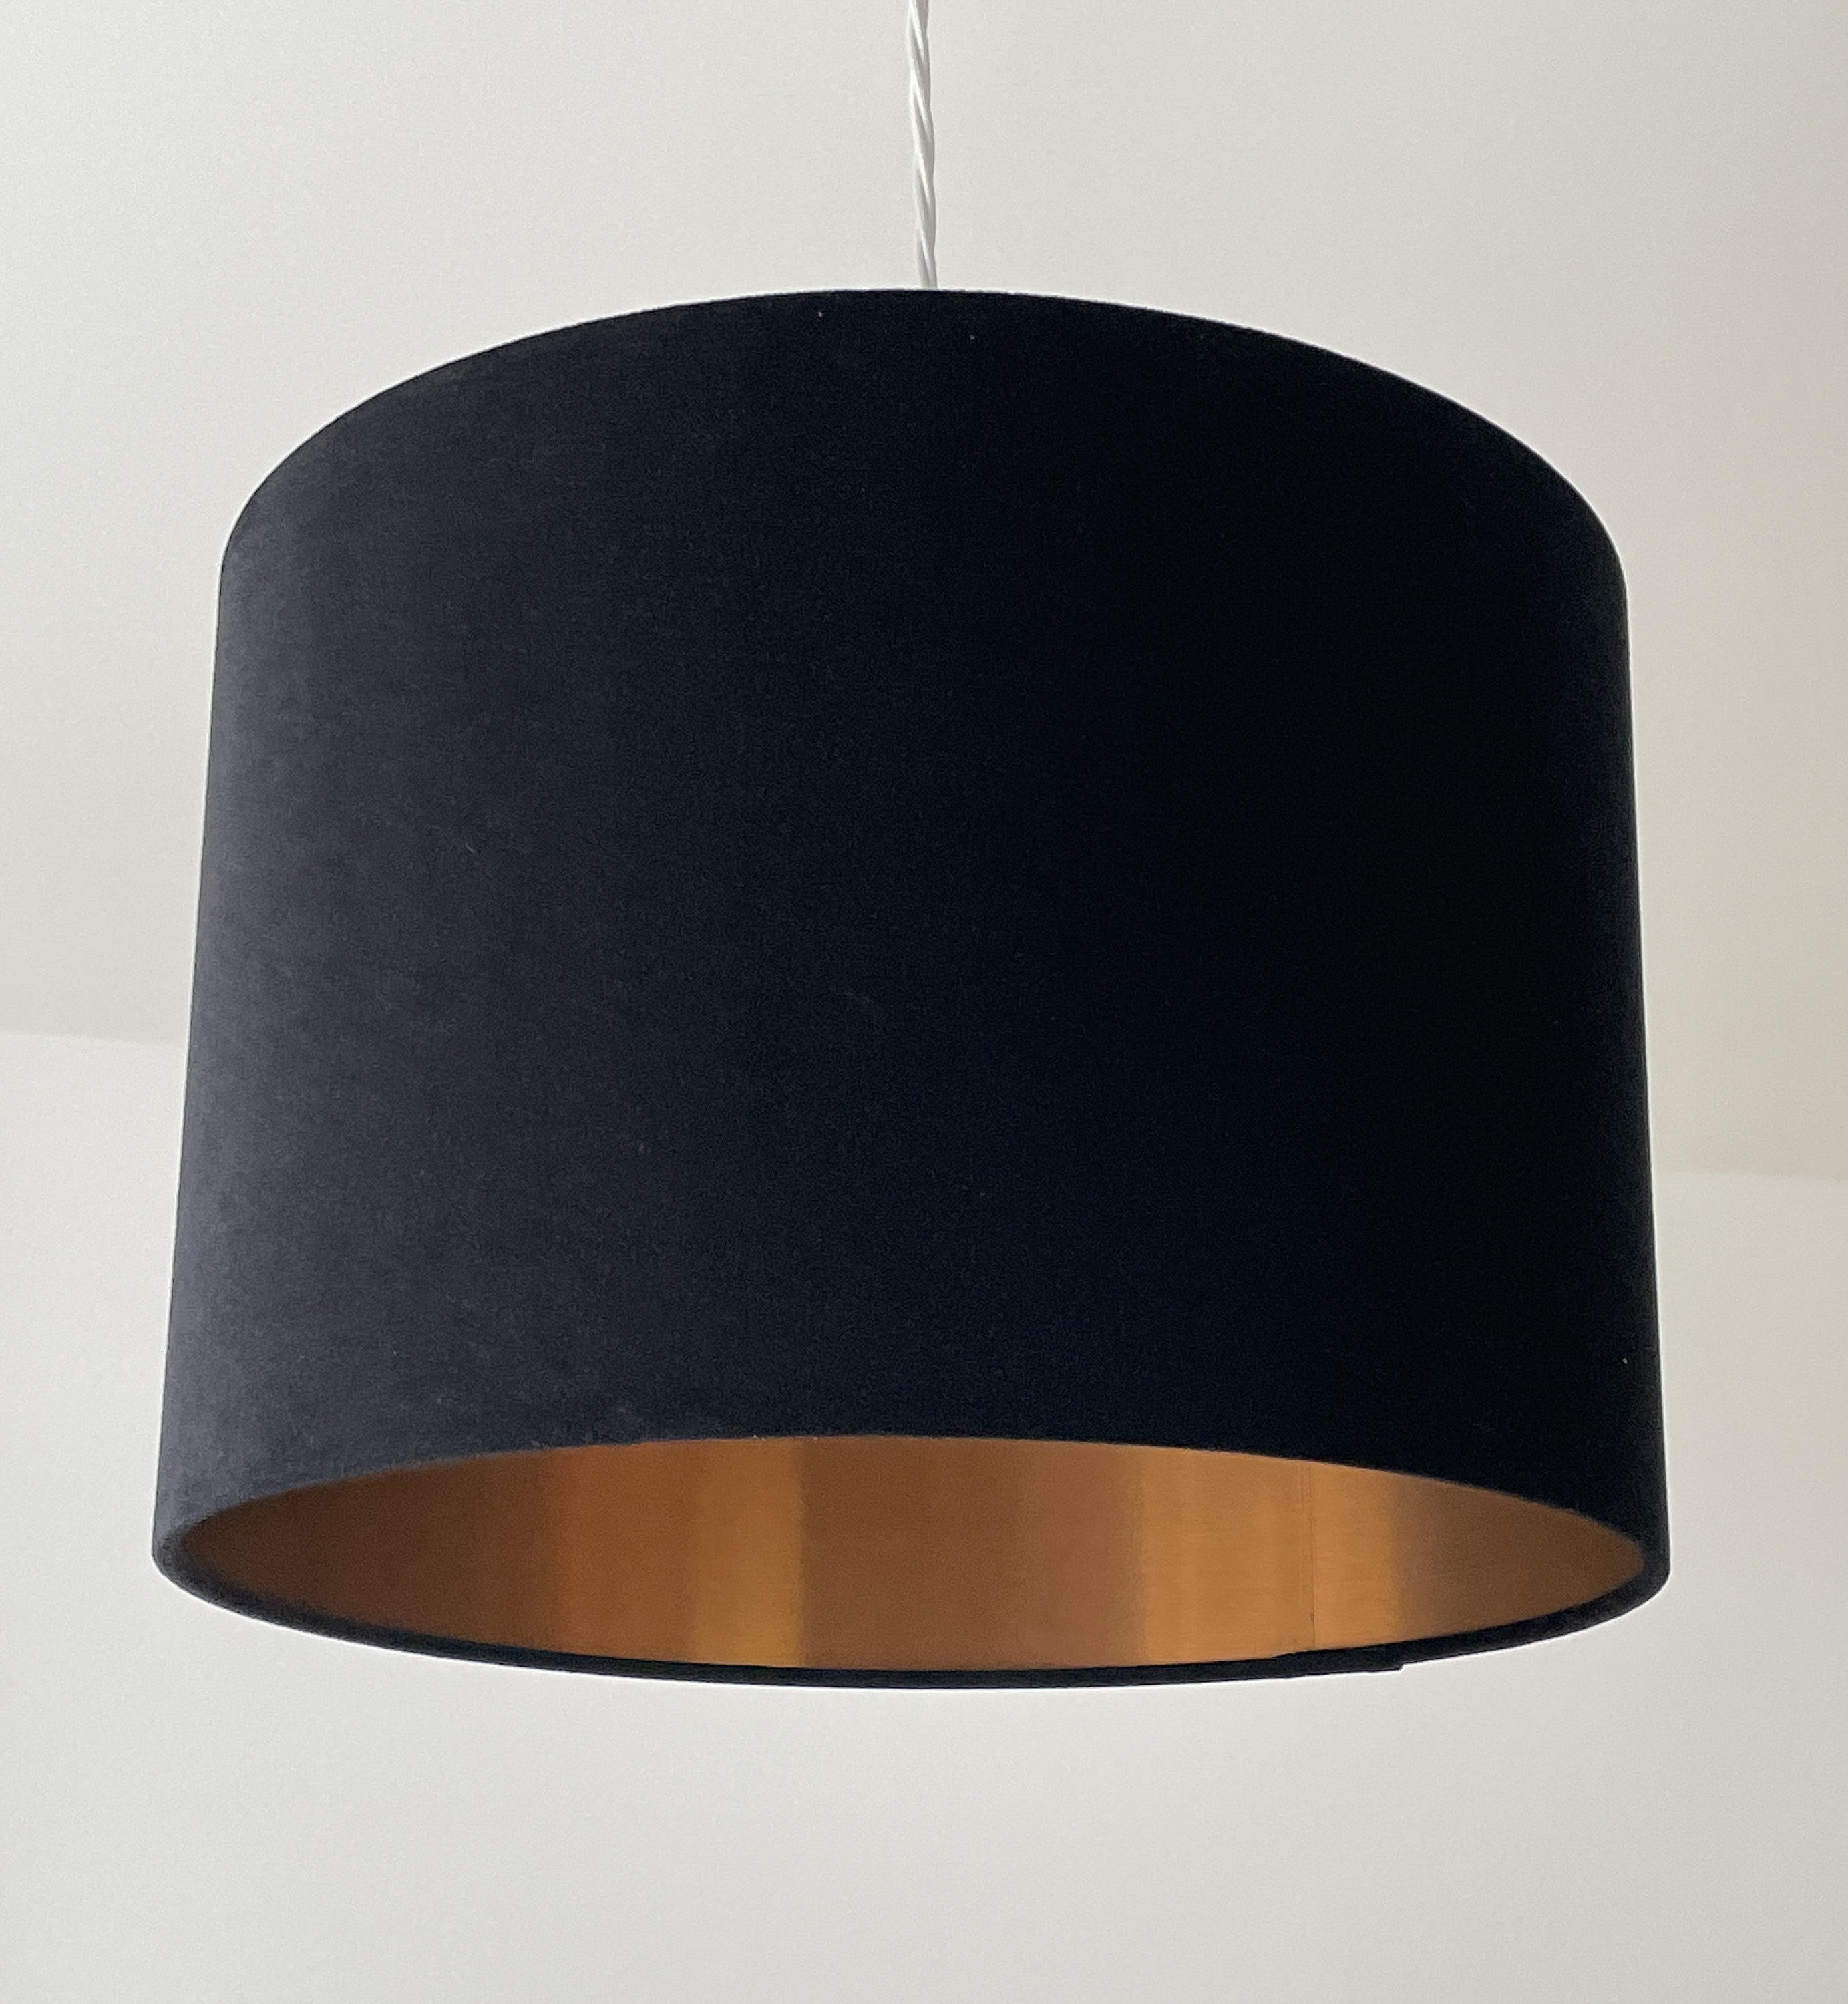 Pair of Black Faux Silk 30cm Drum Light Shade with Copper Inner 